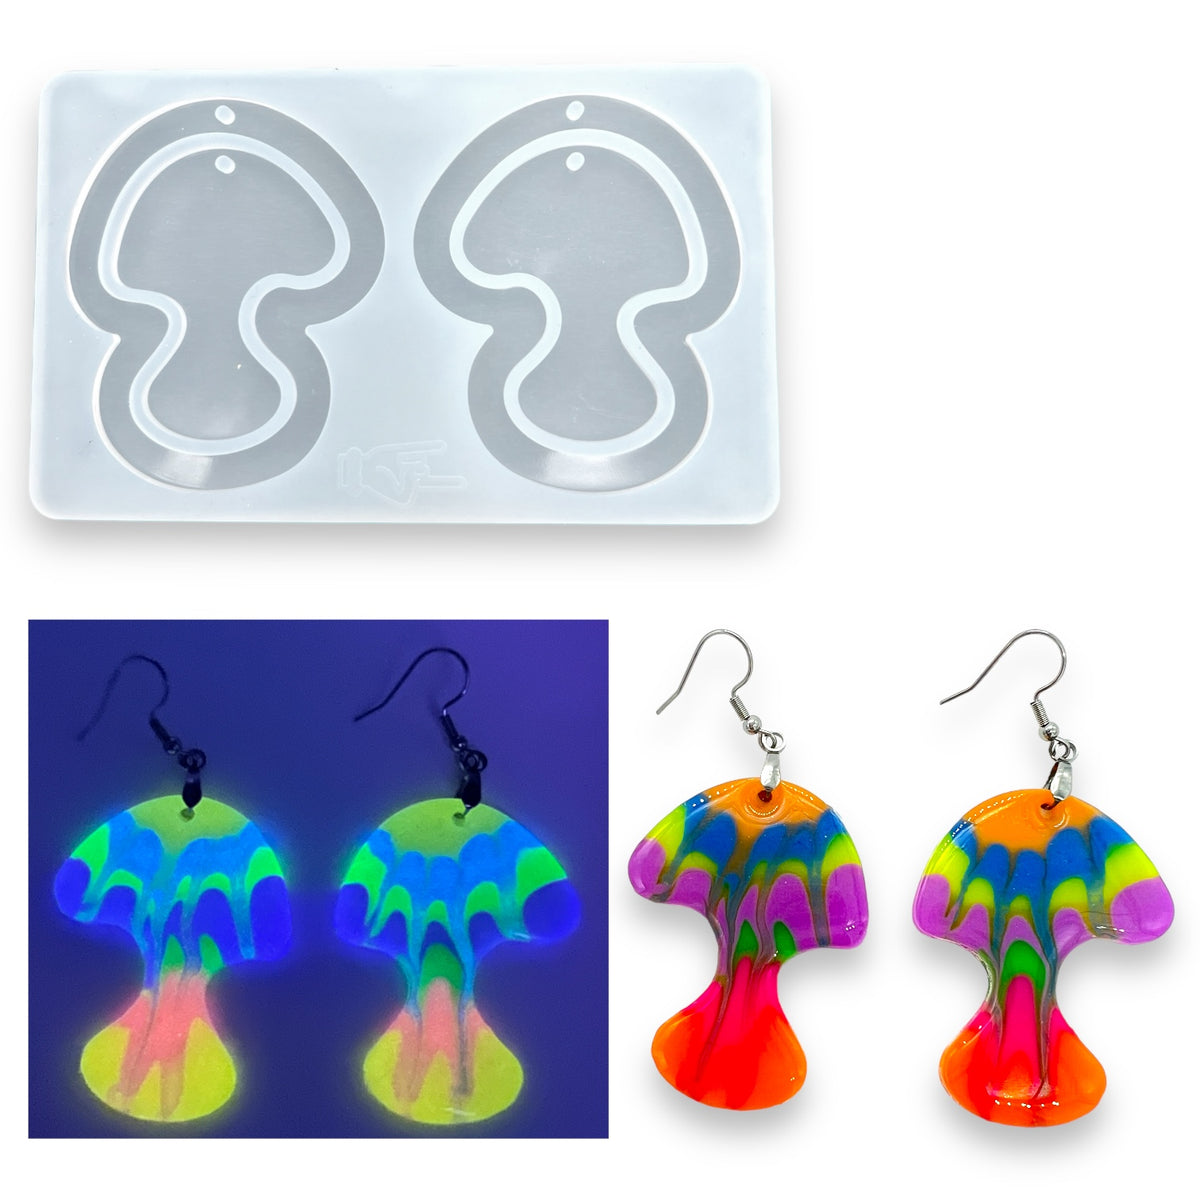 Resin Rockers Exclusive Premium Dual Mushroom Dangle Earring Mold for UV and Epoxy Resin Art Jewelry